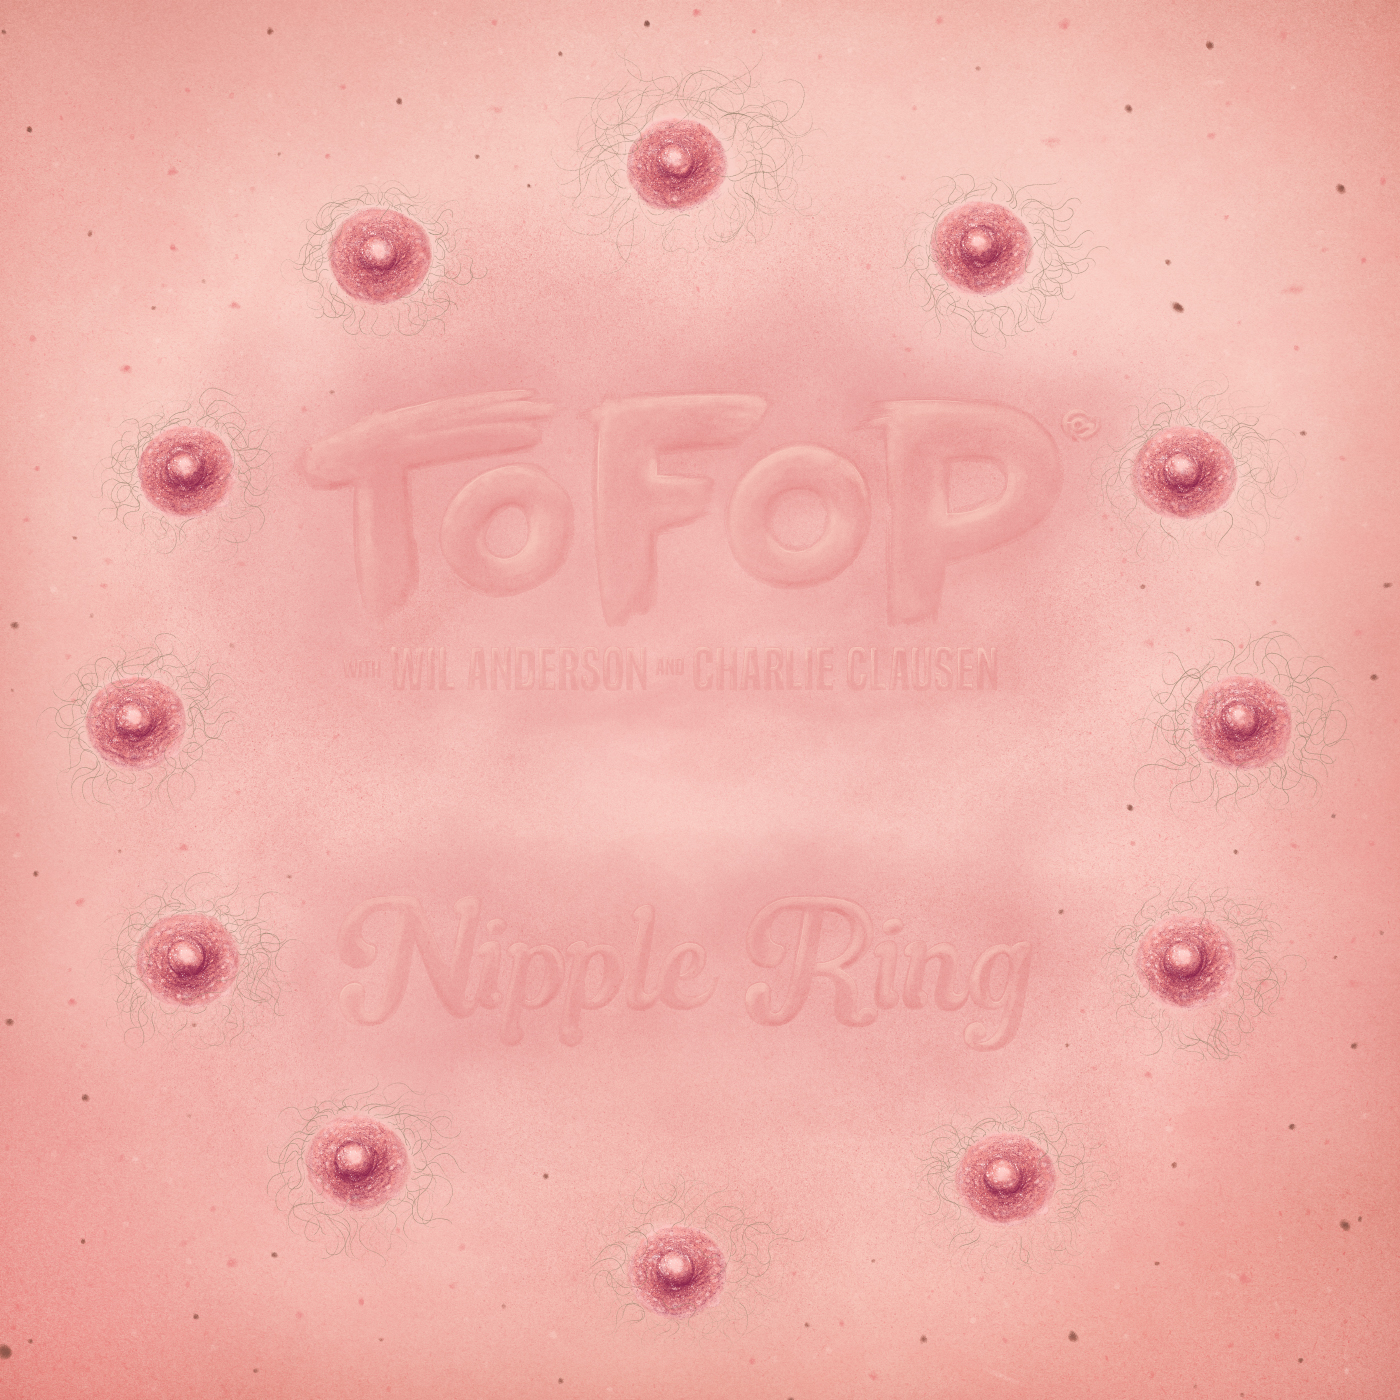 TOFOP: The Nipple Ring